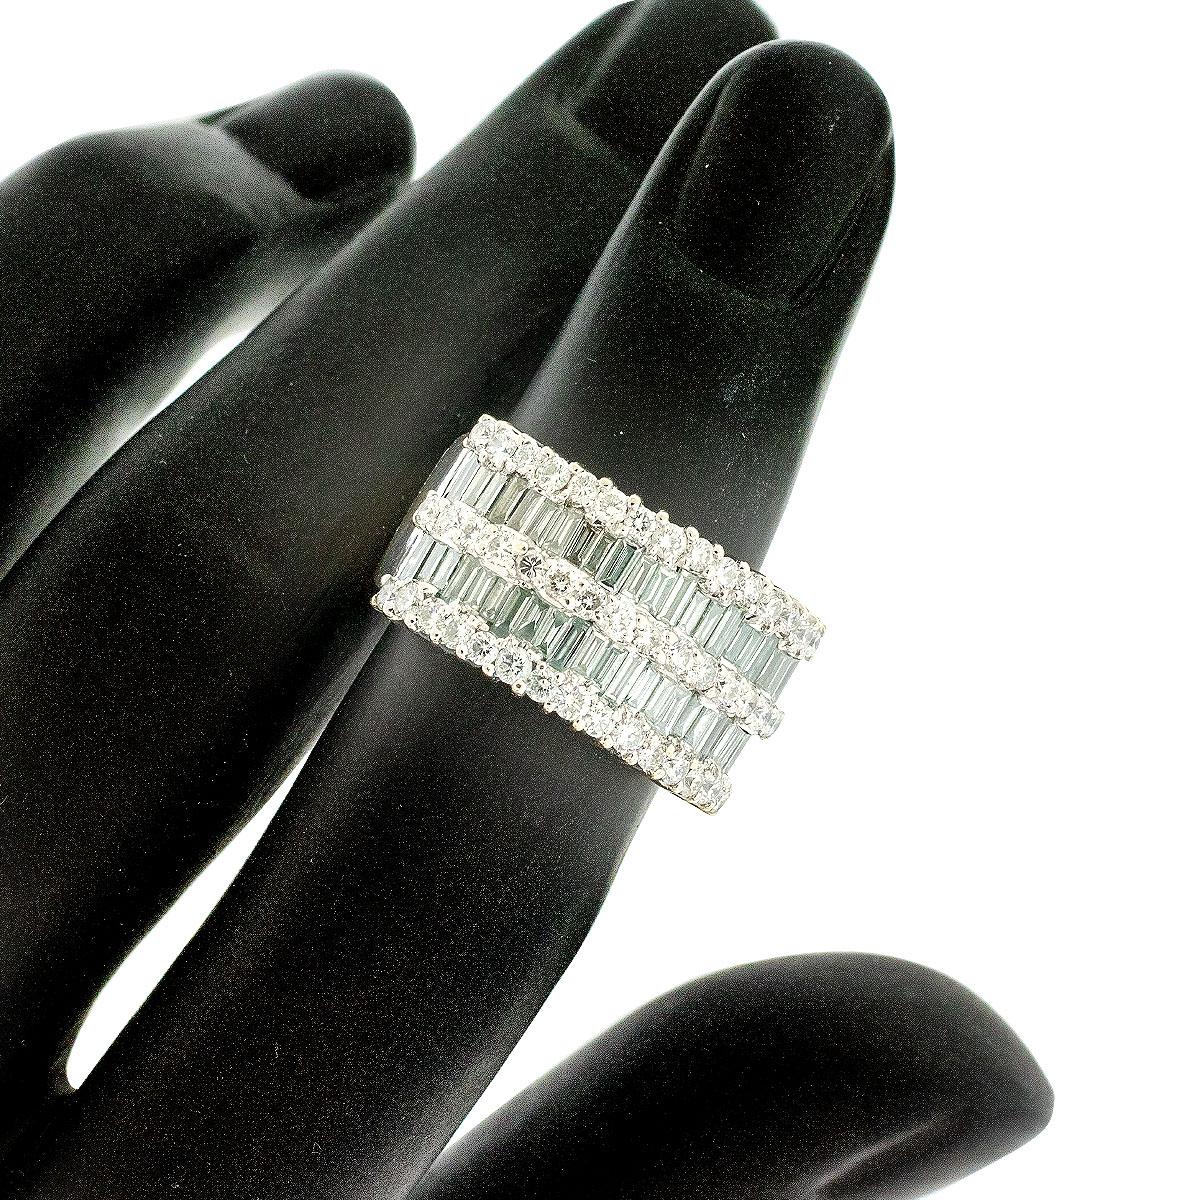 14k White Gold 4ctw Round & Baguette Diamond Wide Ring

When it comes to jewelry, there's nothing quite like the classic beauty of diamonds. If you're searching for a piece that captures the essence of timeless elegance and refined luxury, the 14k